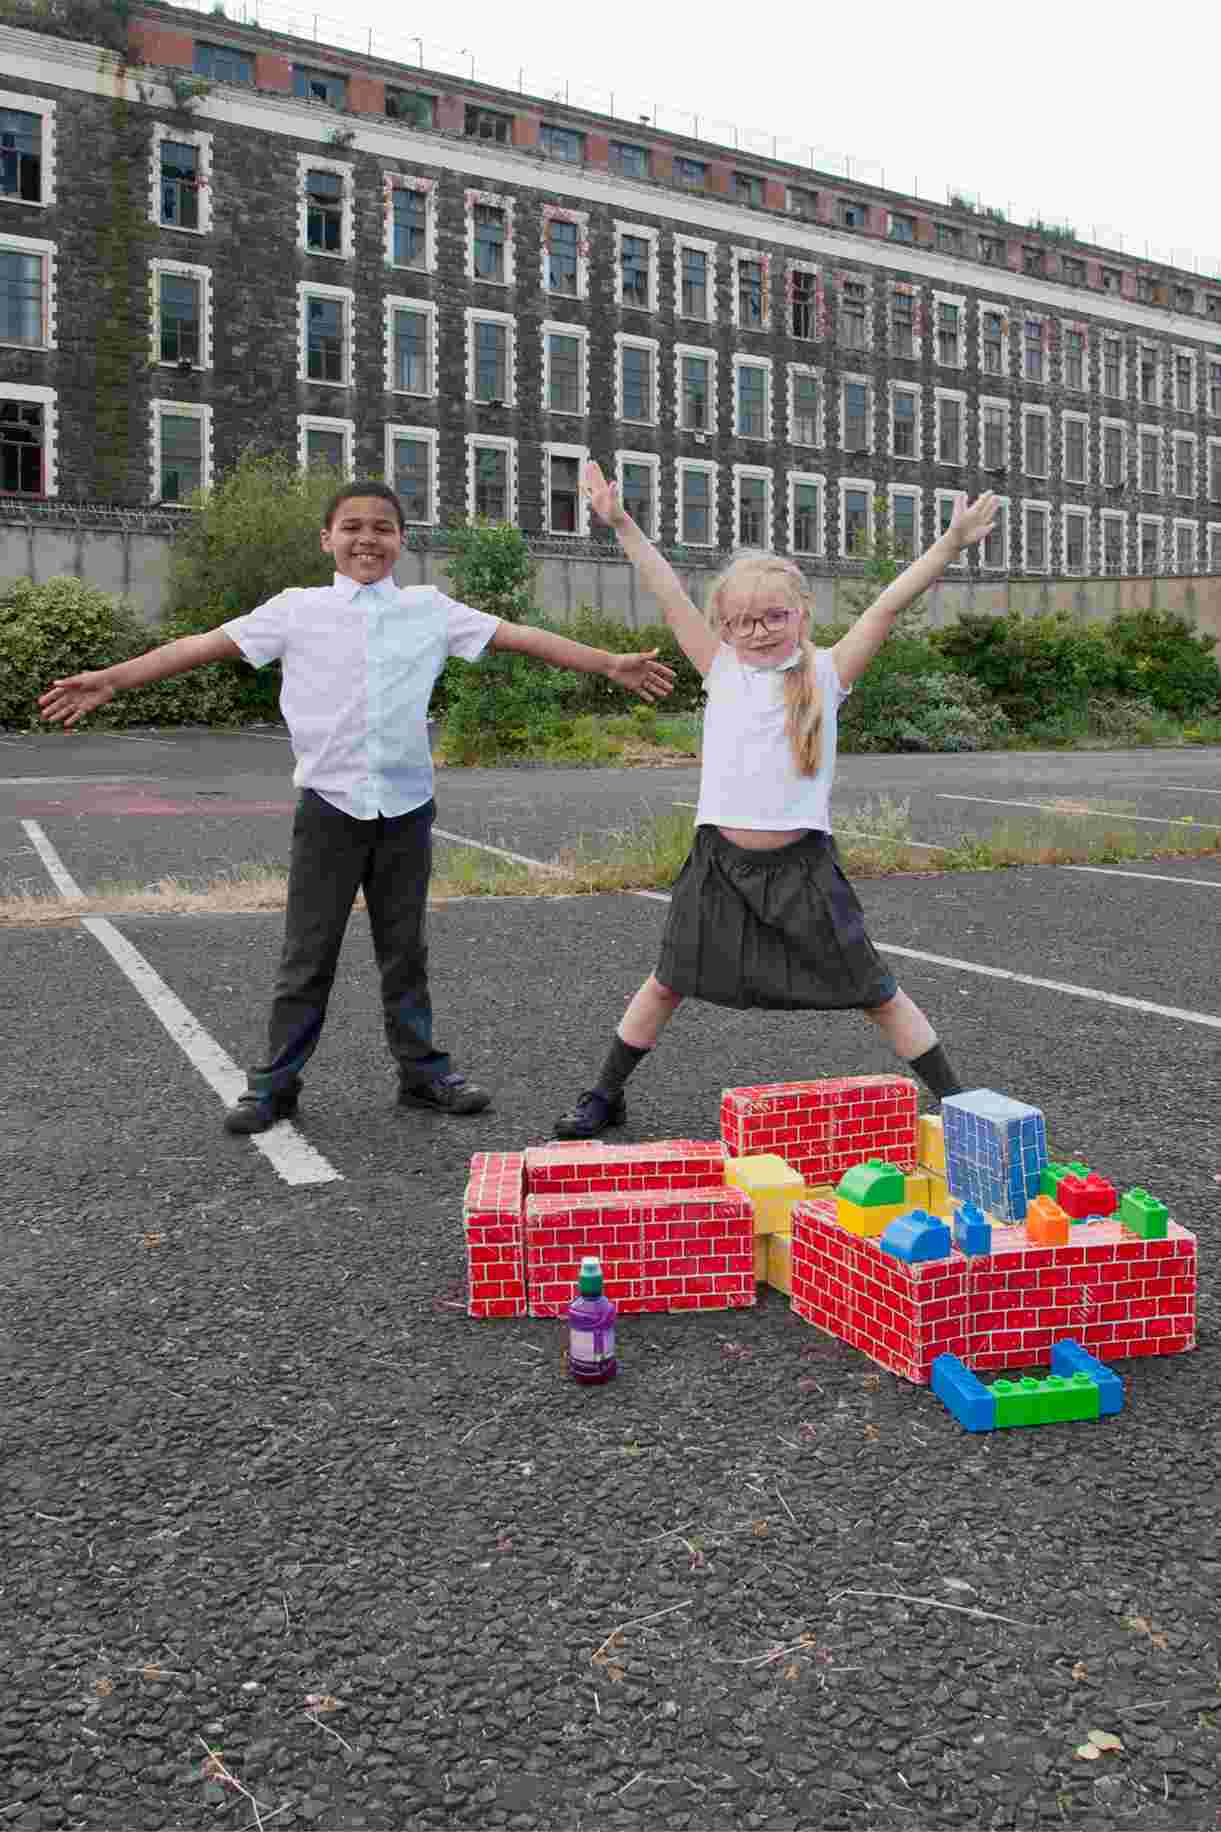 Children play on waste ground in front of disused industrial building